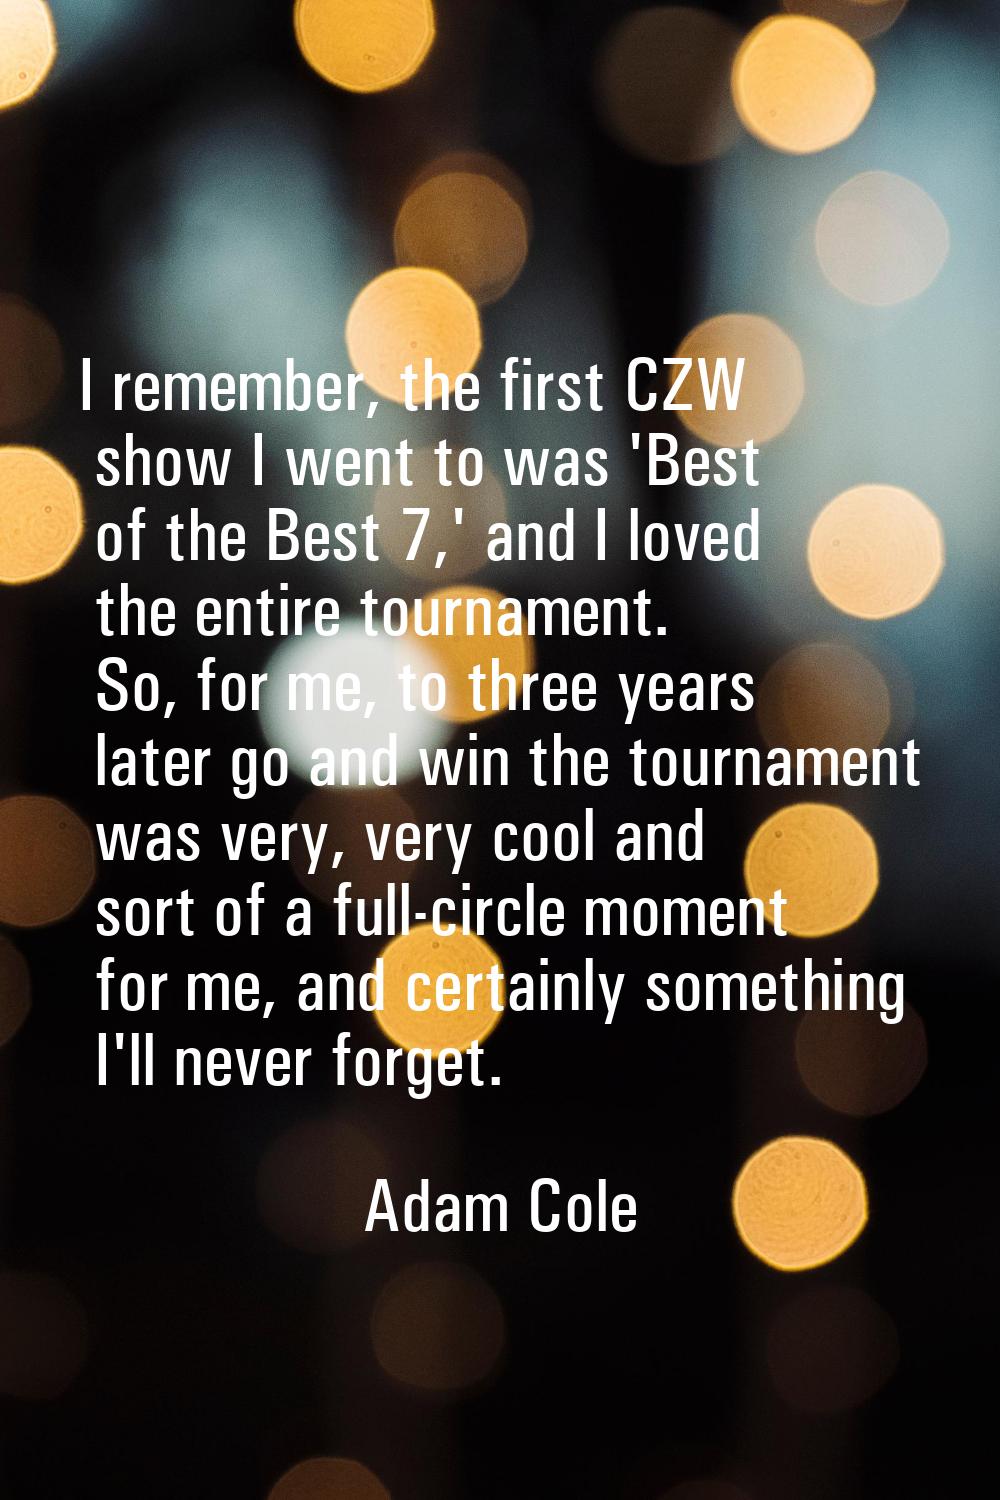 I remember, the first CZW show I went to was 'Best of the Best 7,' and I loved the entire tournamen